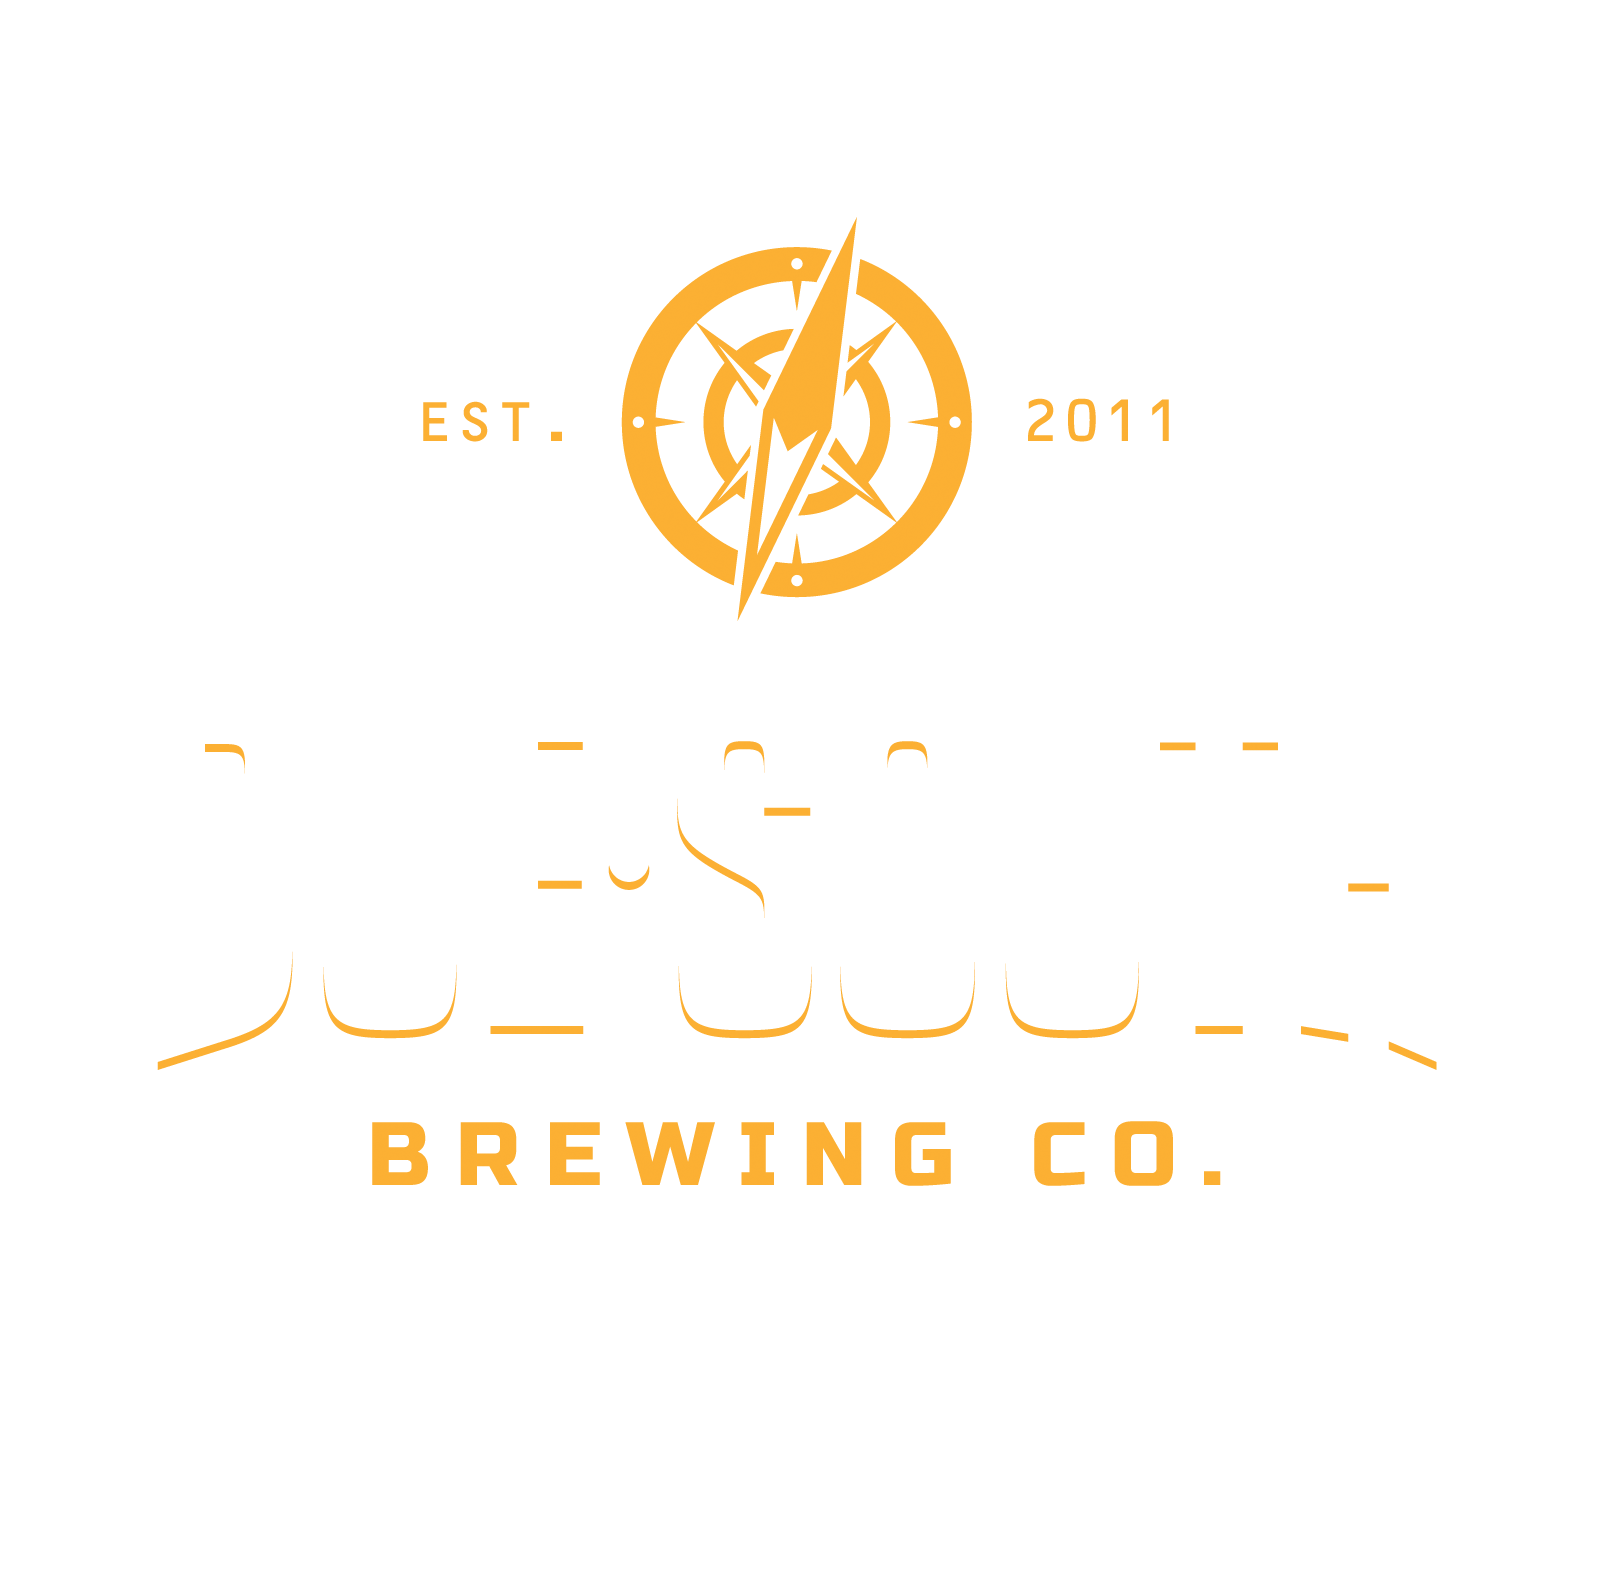 South Logo - Media Kit – Due South Brewing Co.